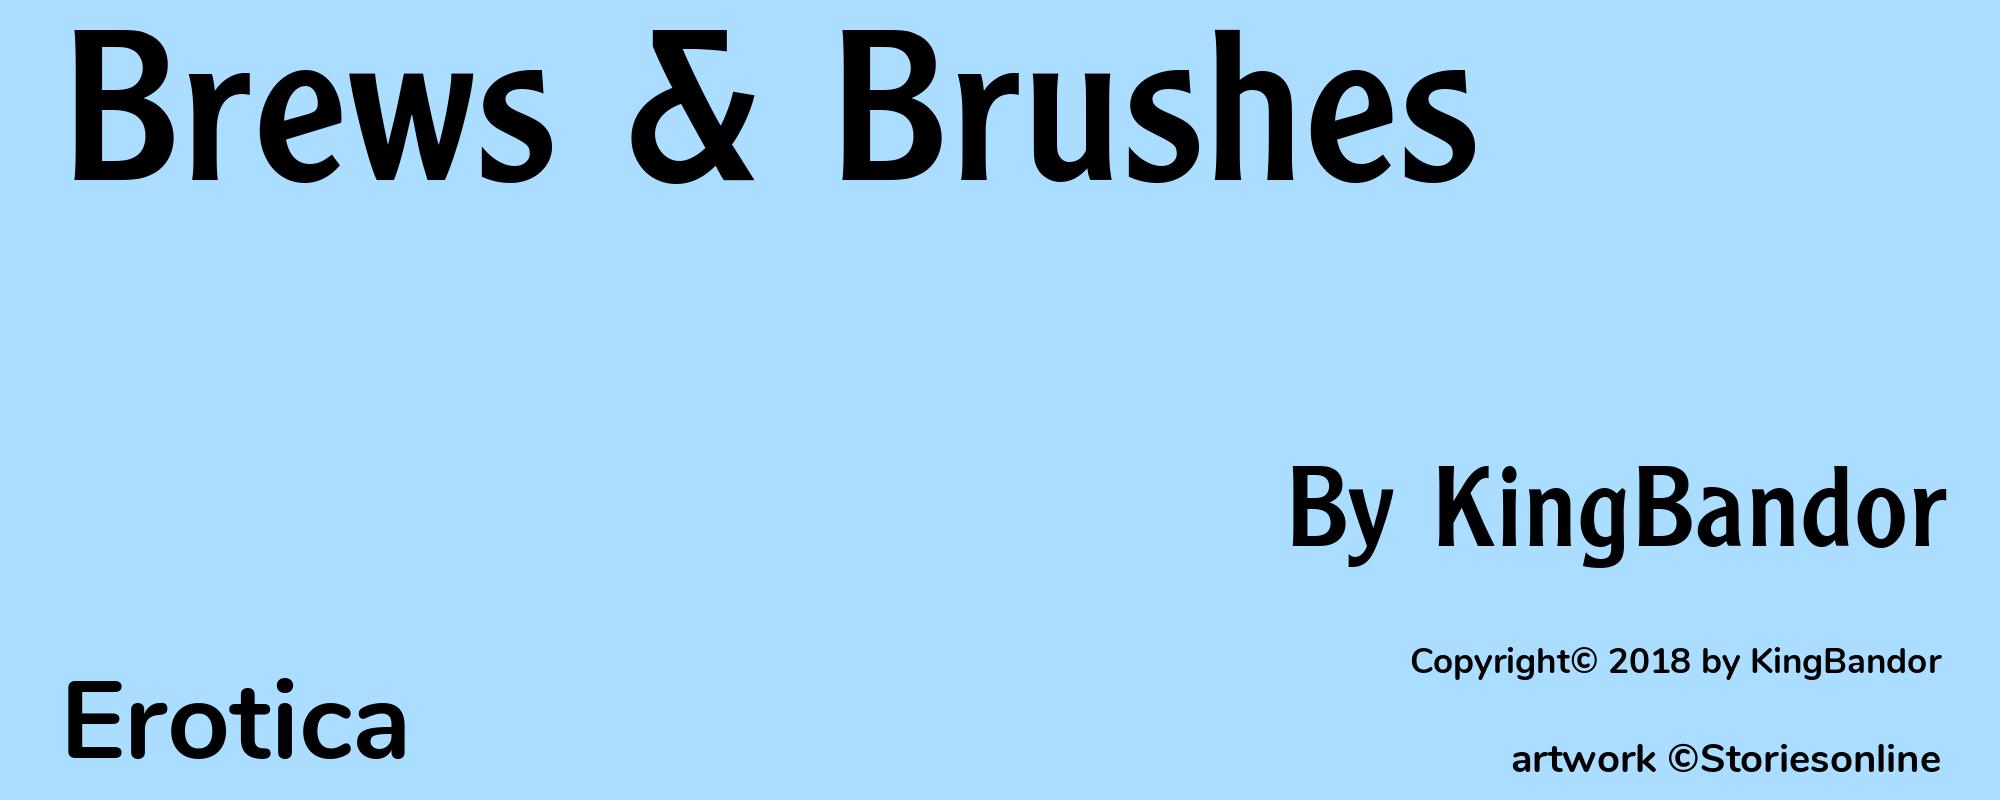 Brews & Brushes - Cover